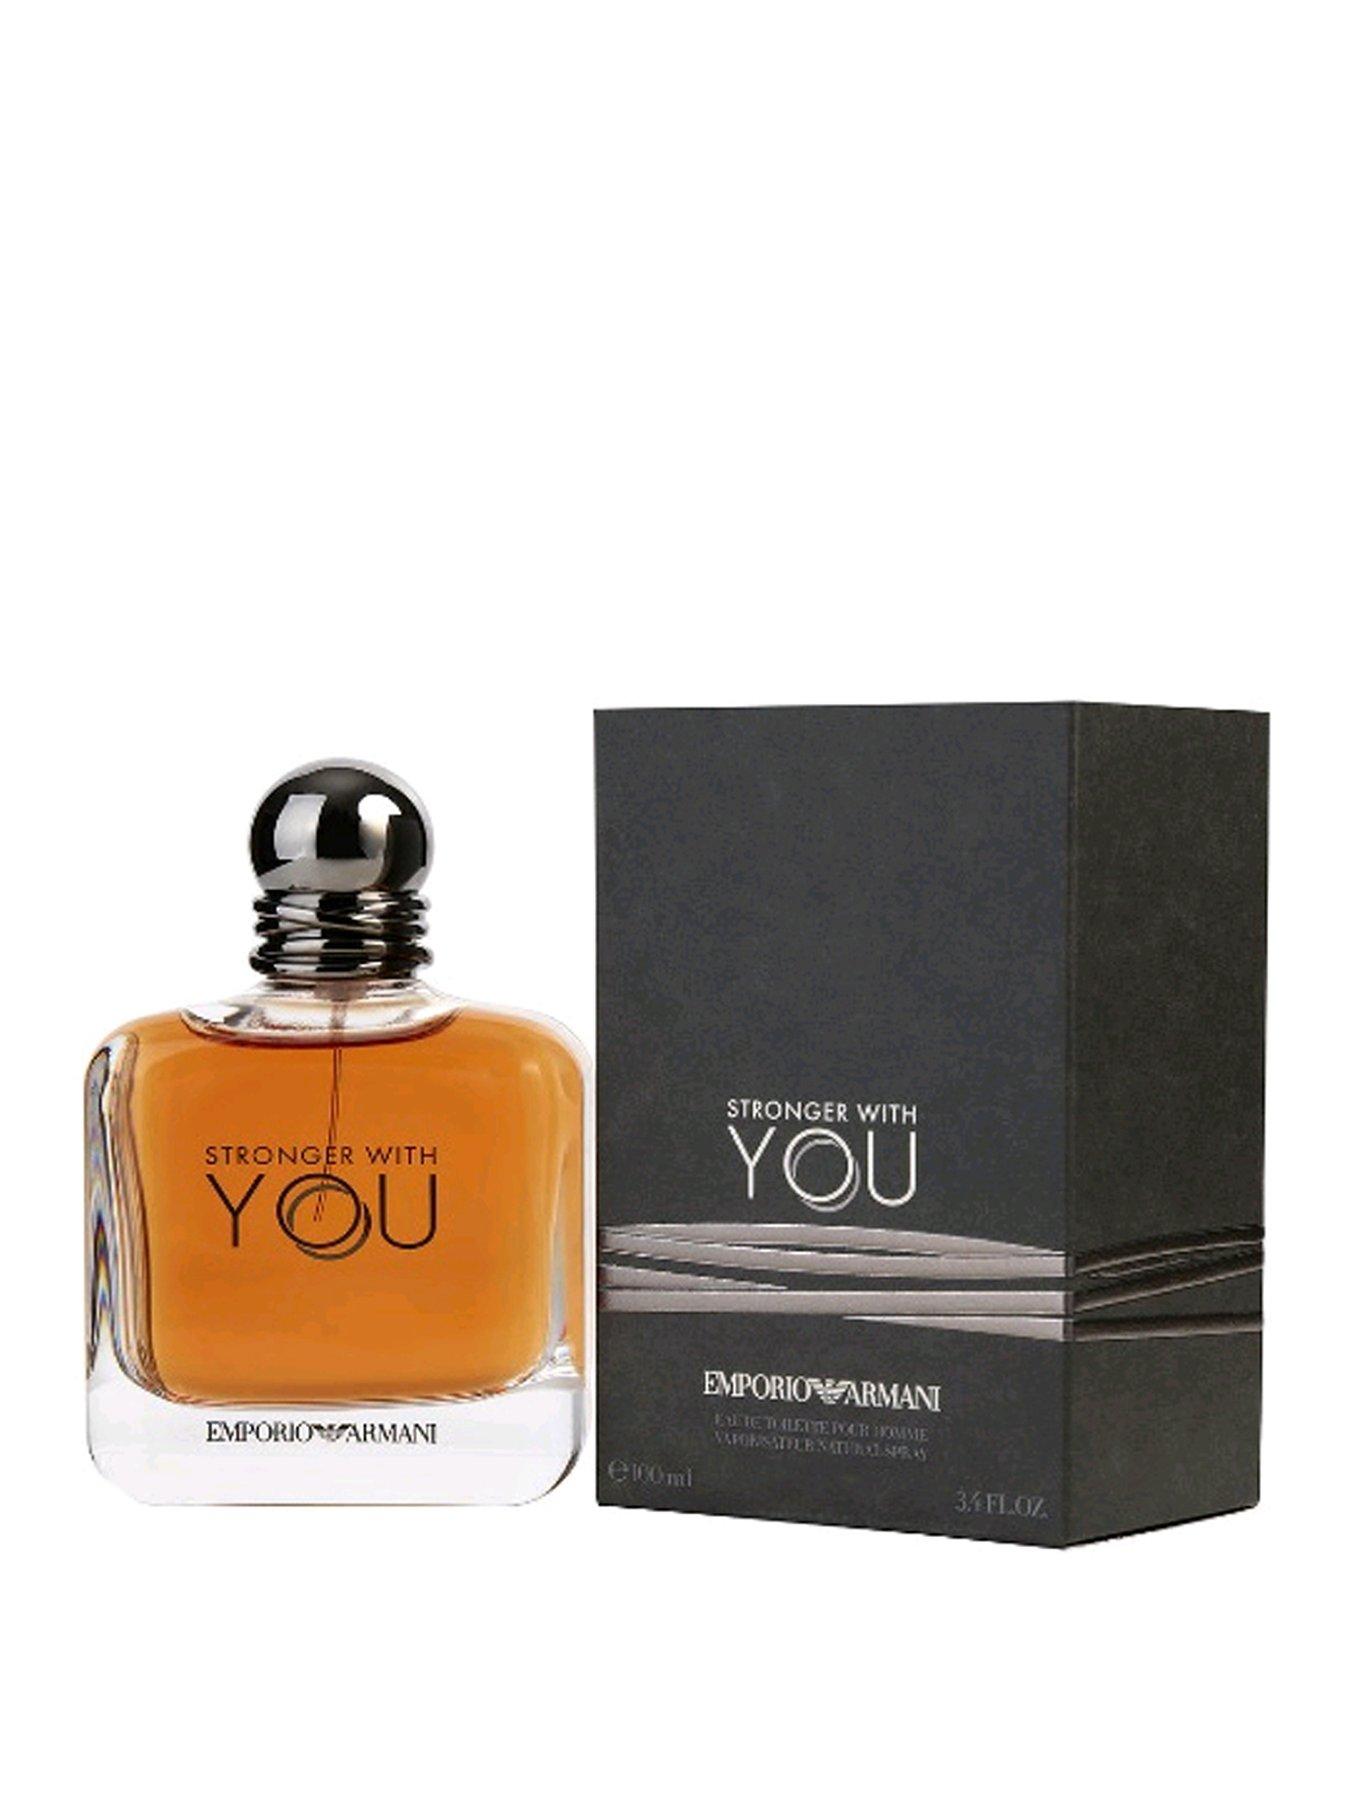 stronger with you 100ml gift set